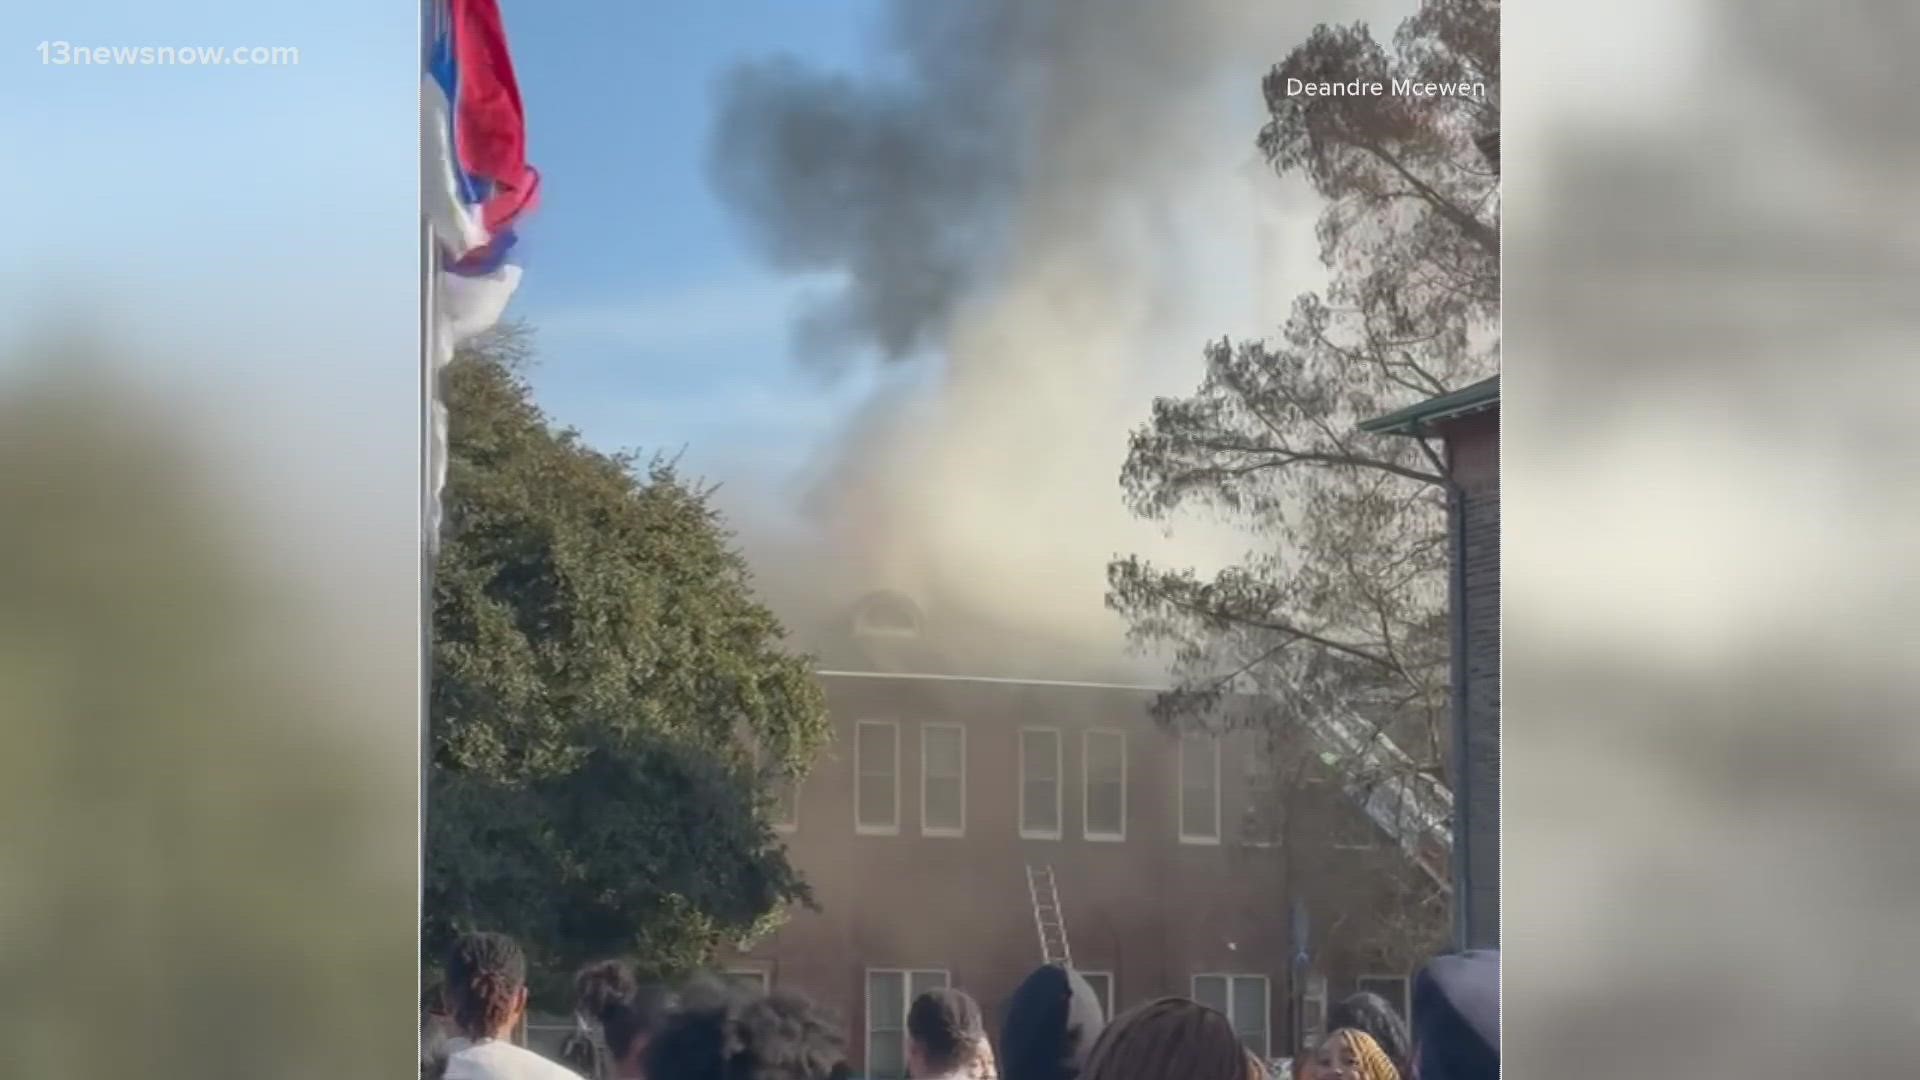 A spokesperson for Hampton University confirms there is a fire at the administration building, Palmer Hall.